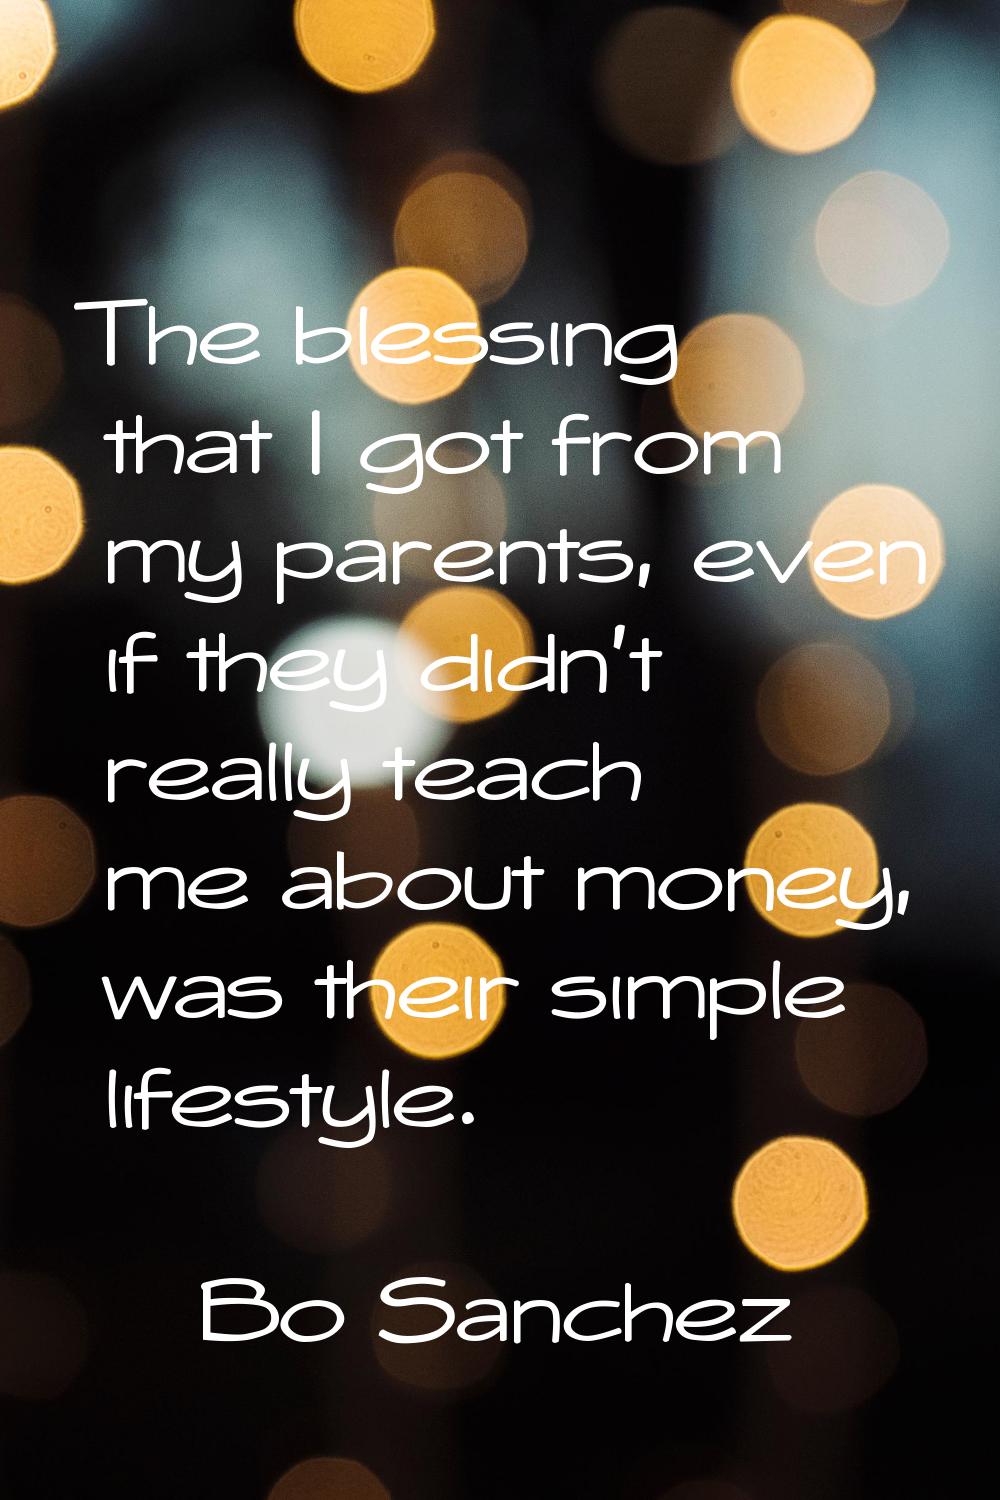 The blessing that I got from my parents, even if they didn't really teach me about money, was their